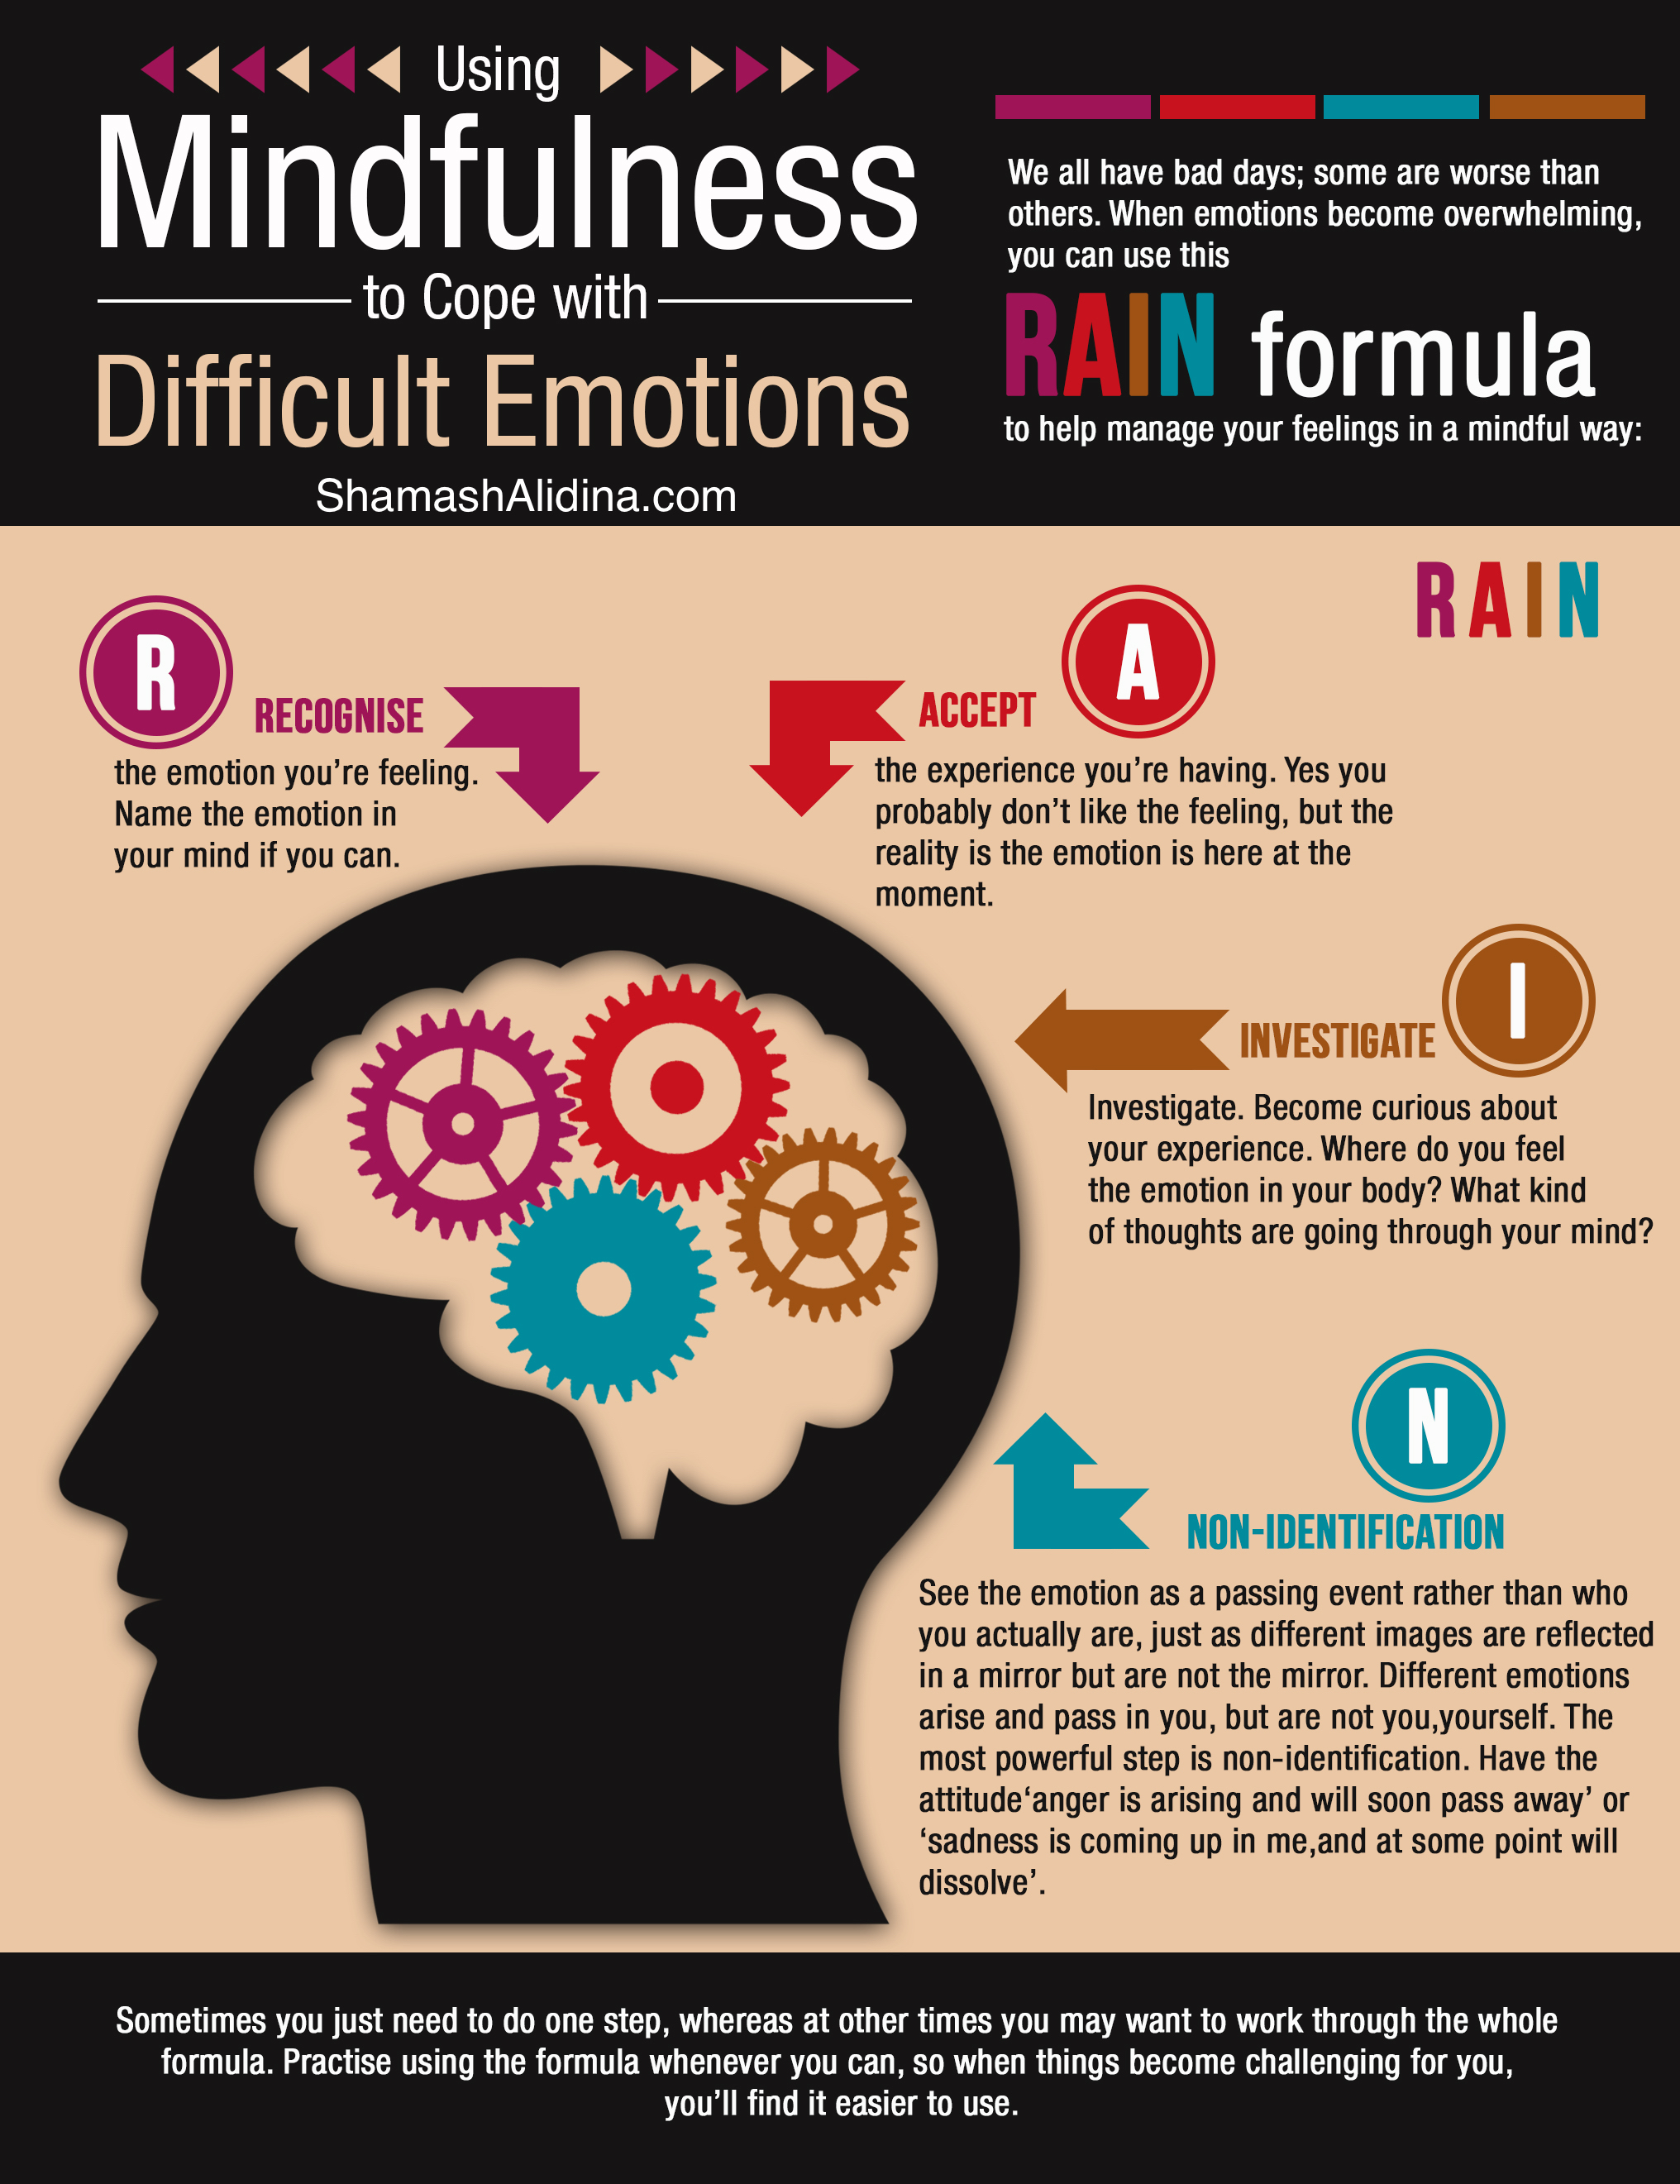 problem solving and emotions